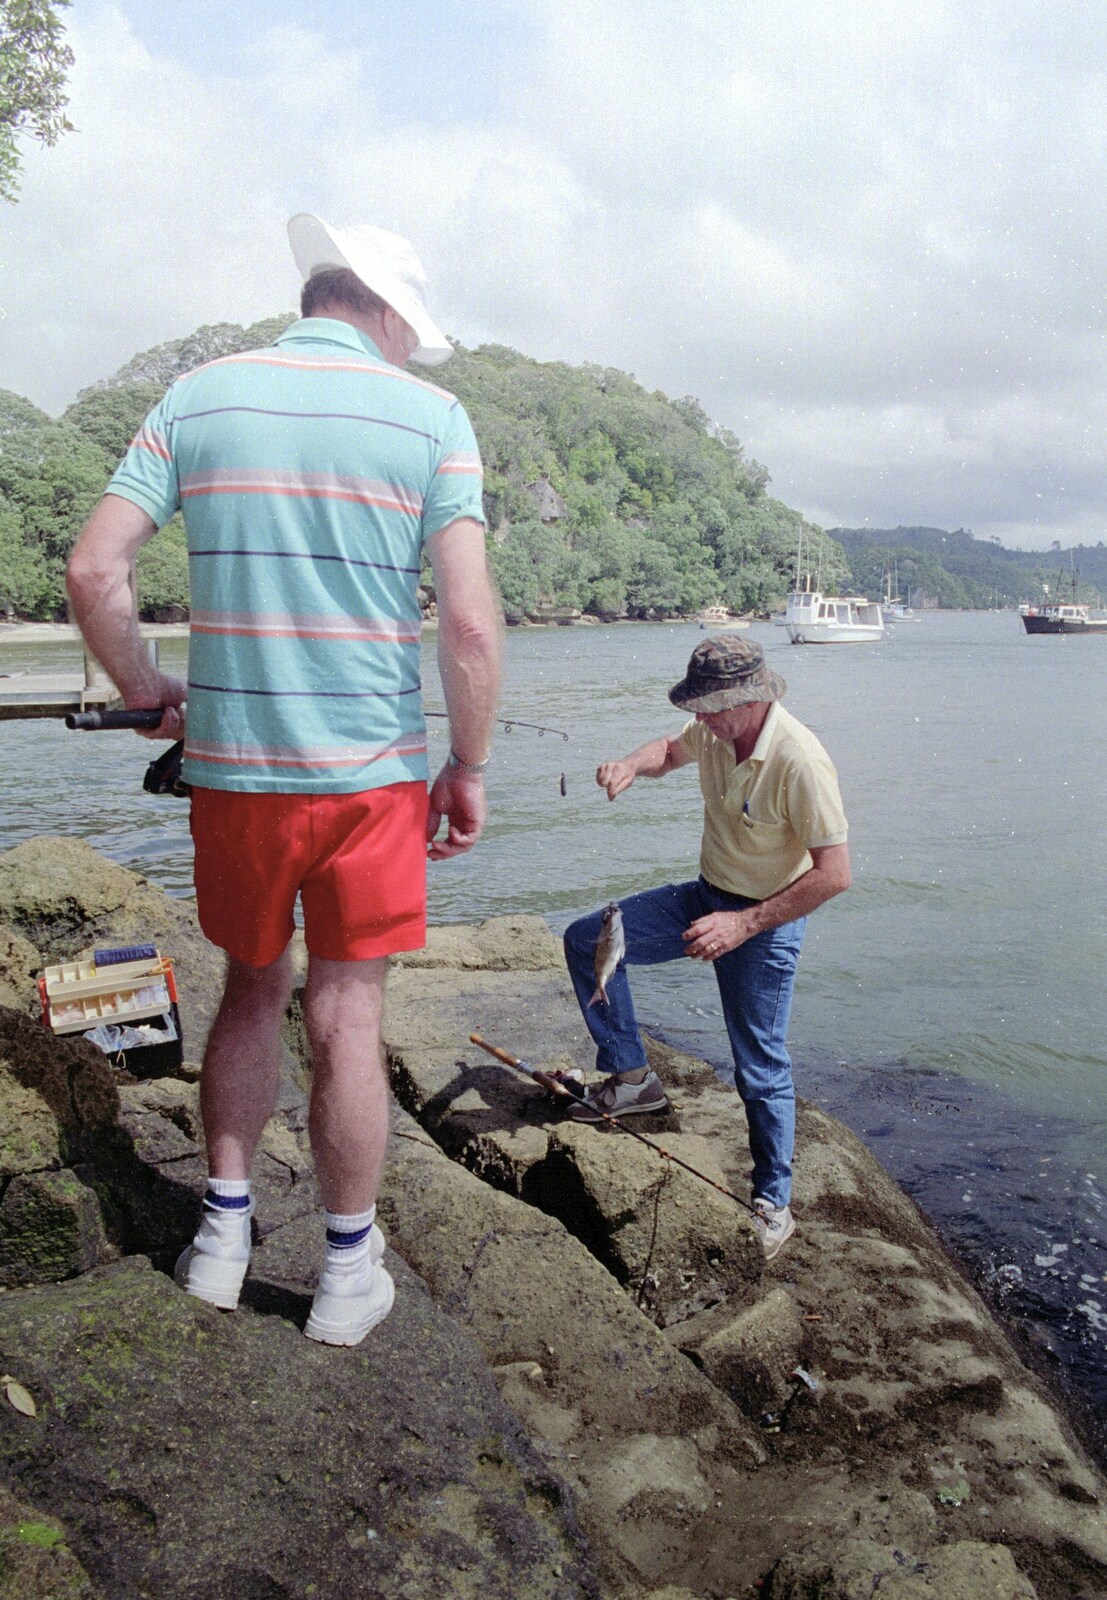 Clive climbs the rocks with a fish in tow from Ferry Landing, Whitianga, New Zealand - 23rd November 1992